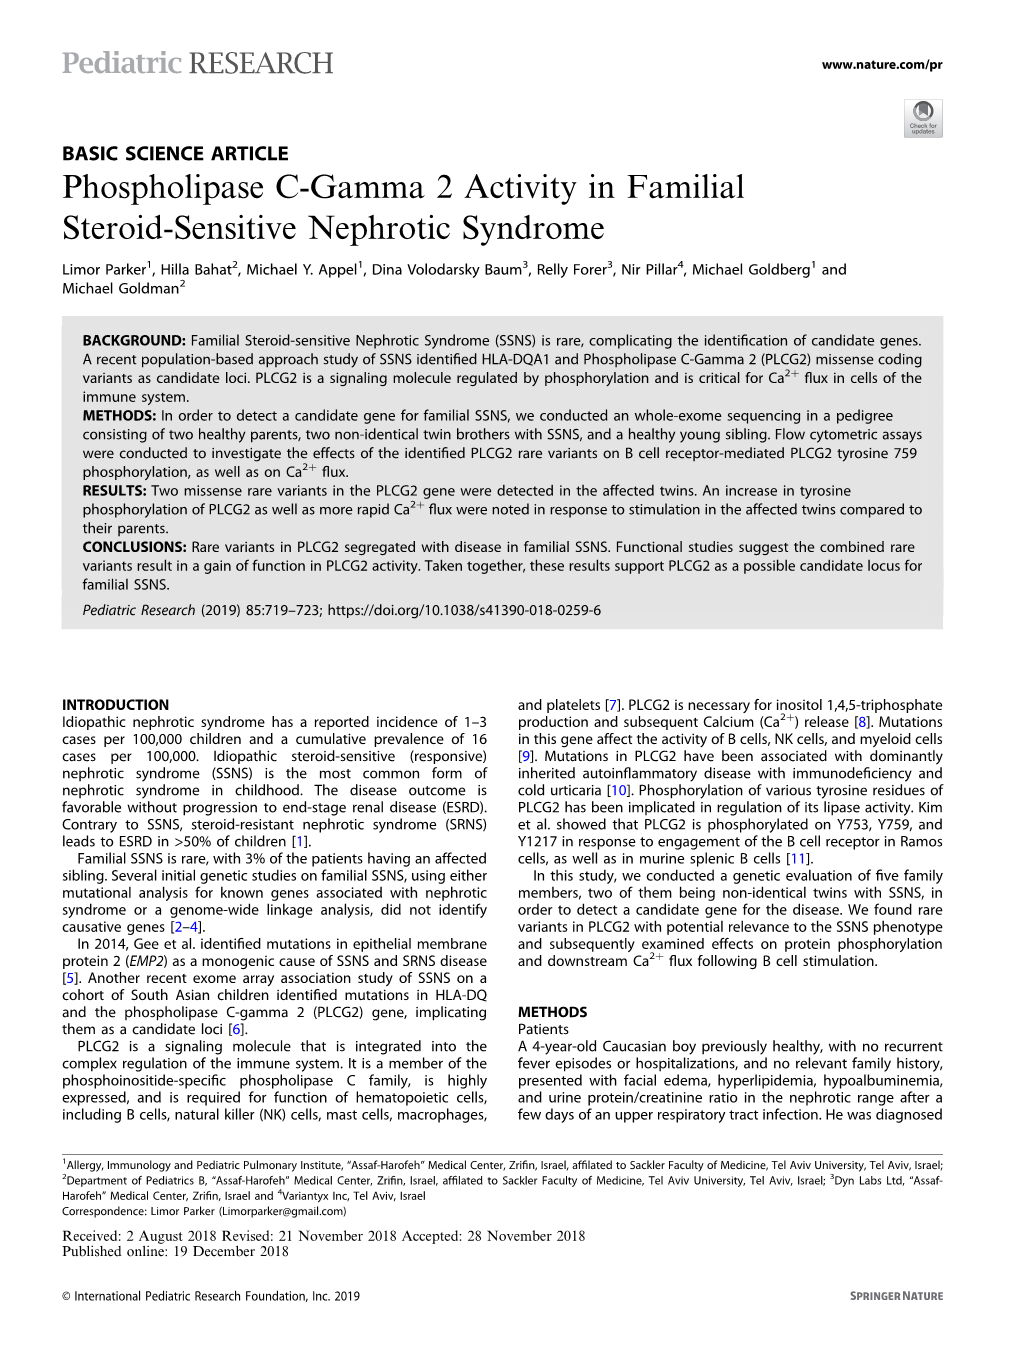 Phospholipase C-Gamma 2 Activity in Familial Steroid-Sensitive Nephrotic Syndrome